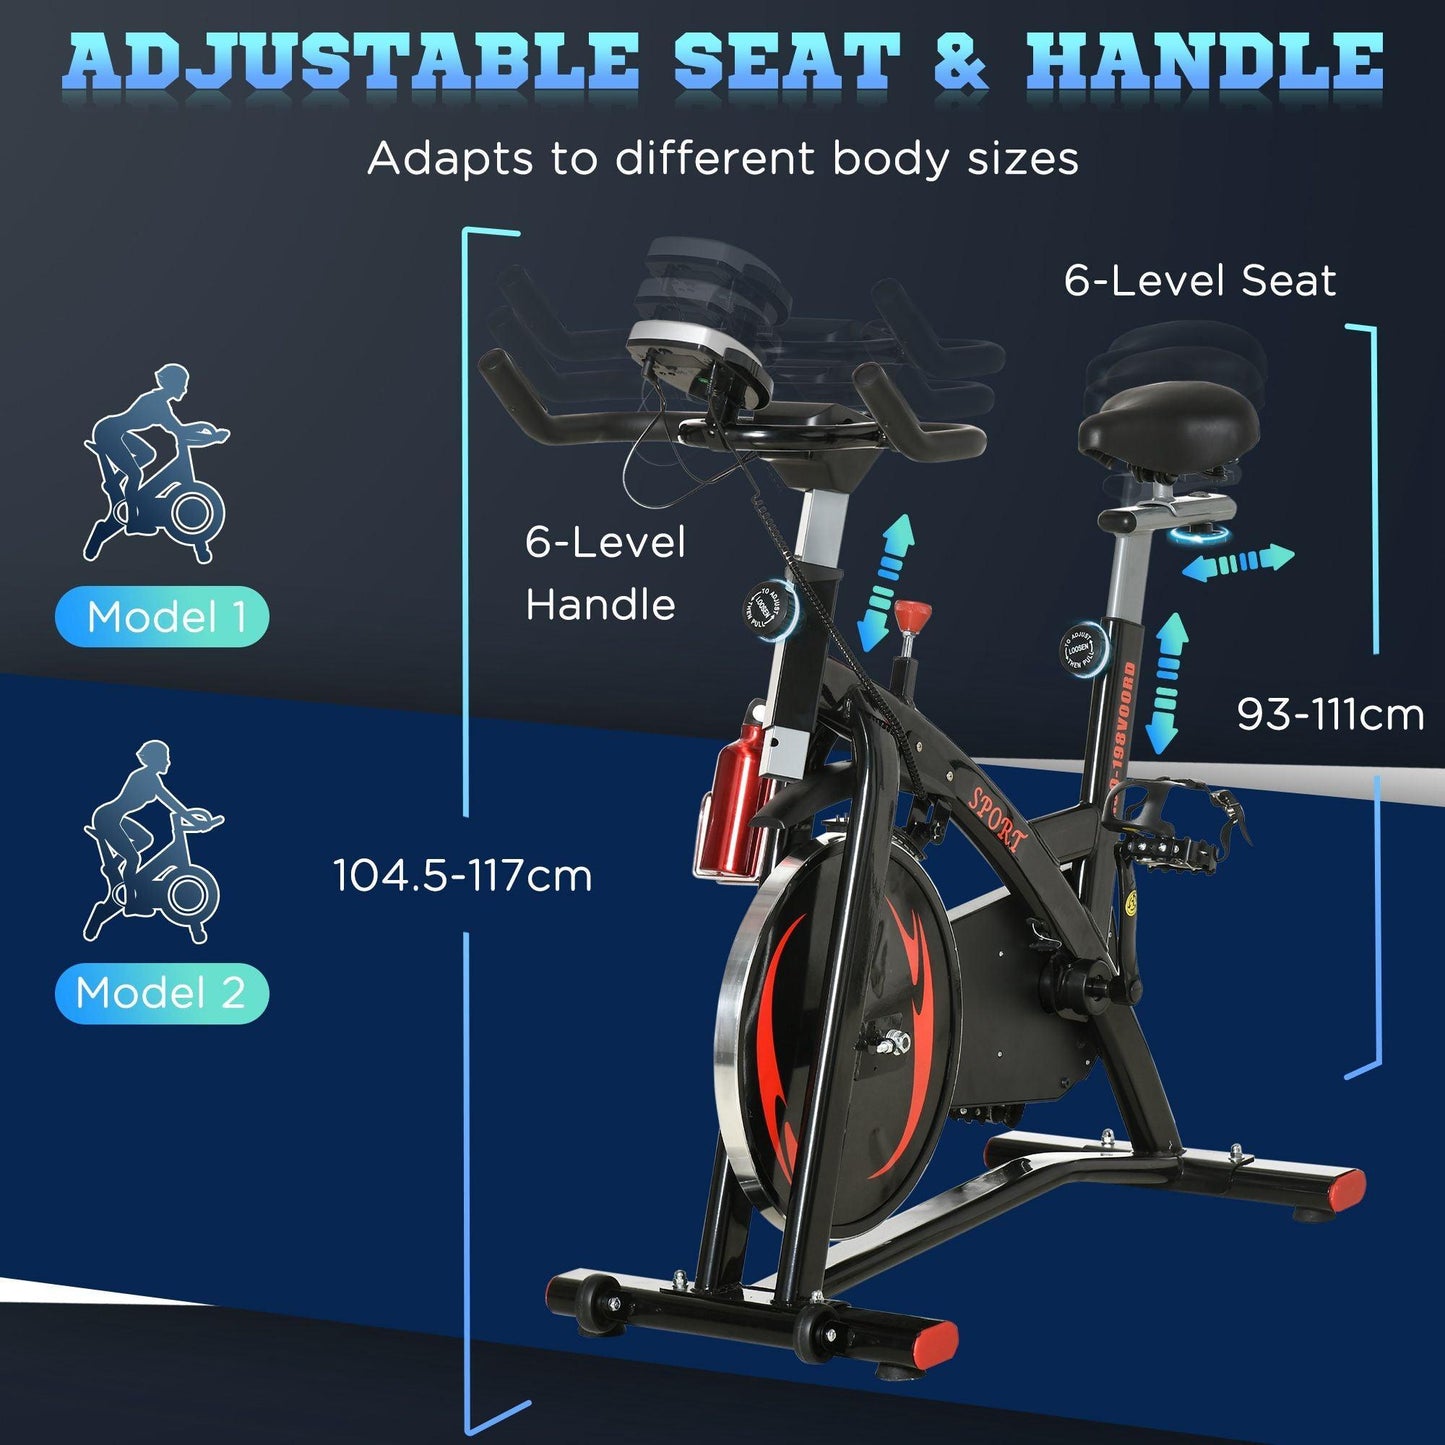 HOMCOM Exercise Bike: Indoor Upright Cycling with LCD Monitor - ALL4U RETAILER LTD